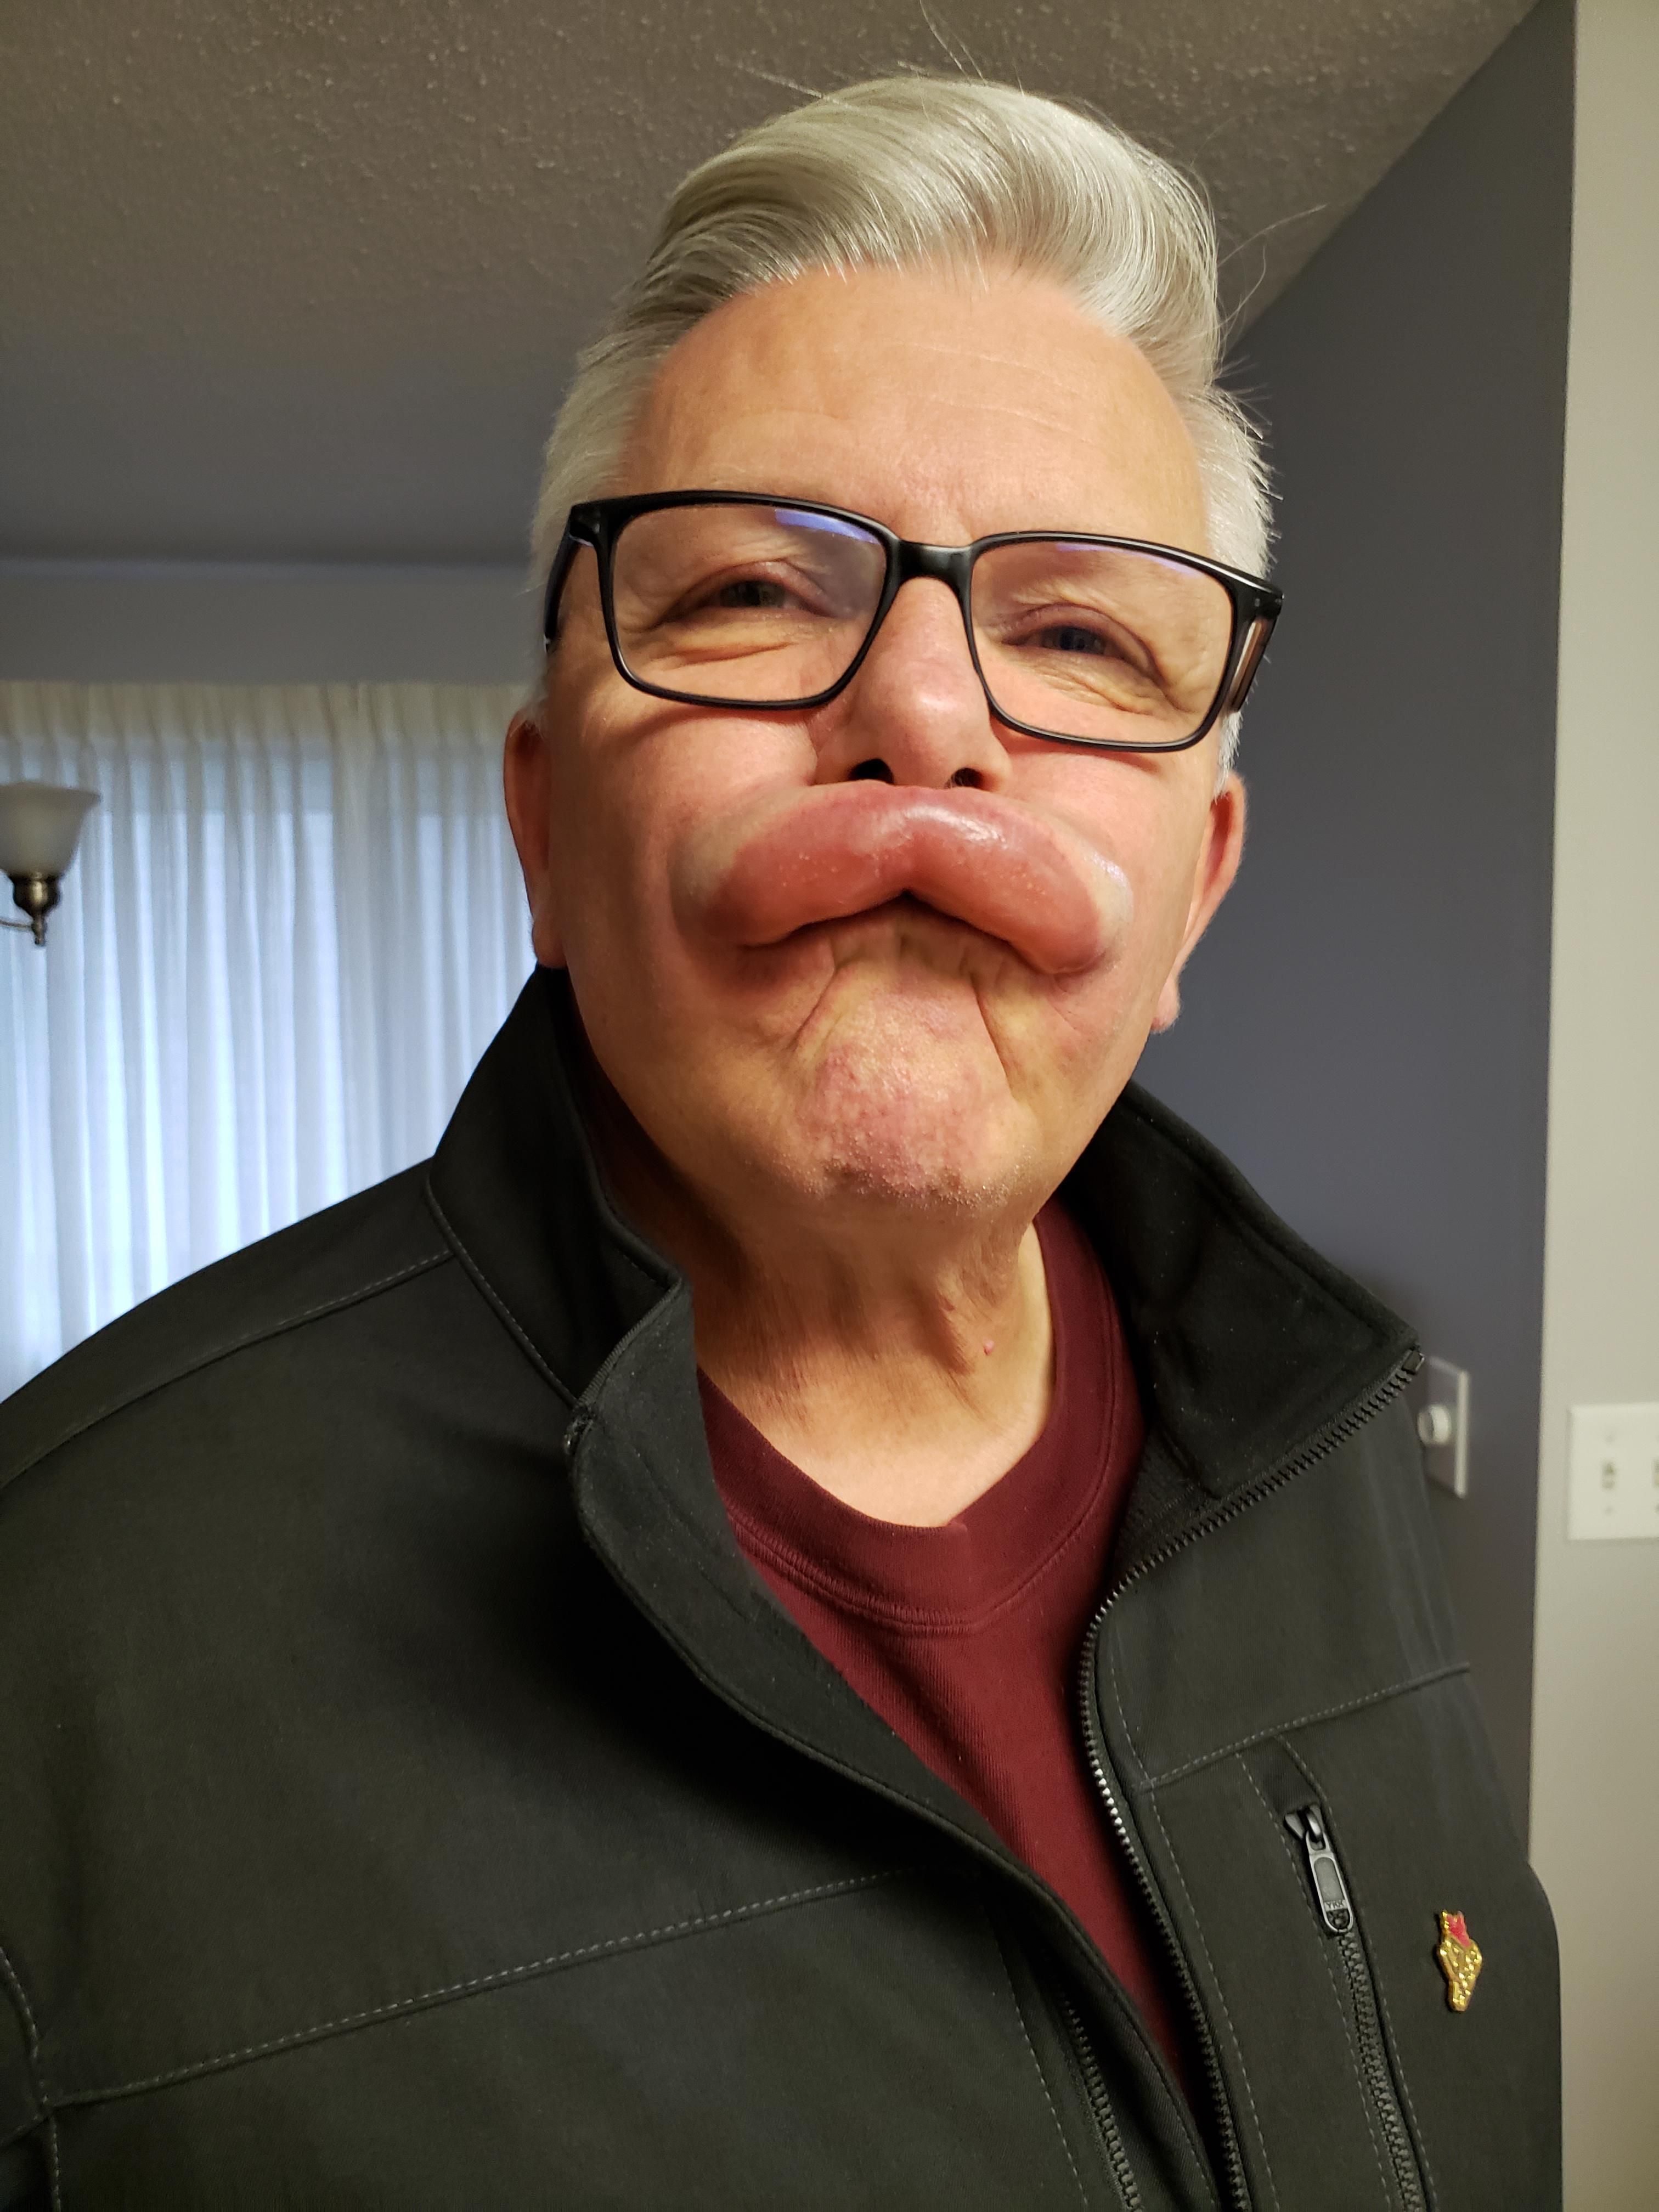 My dad had a small reaction after his root canal today.